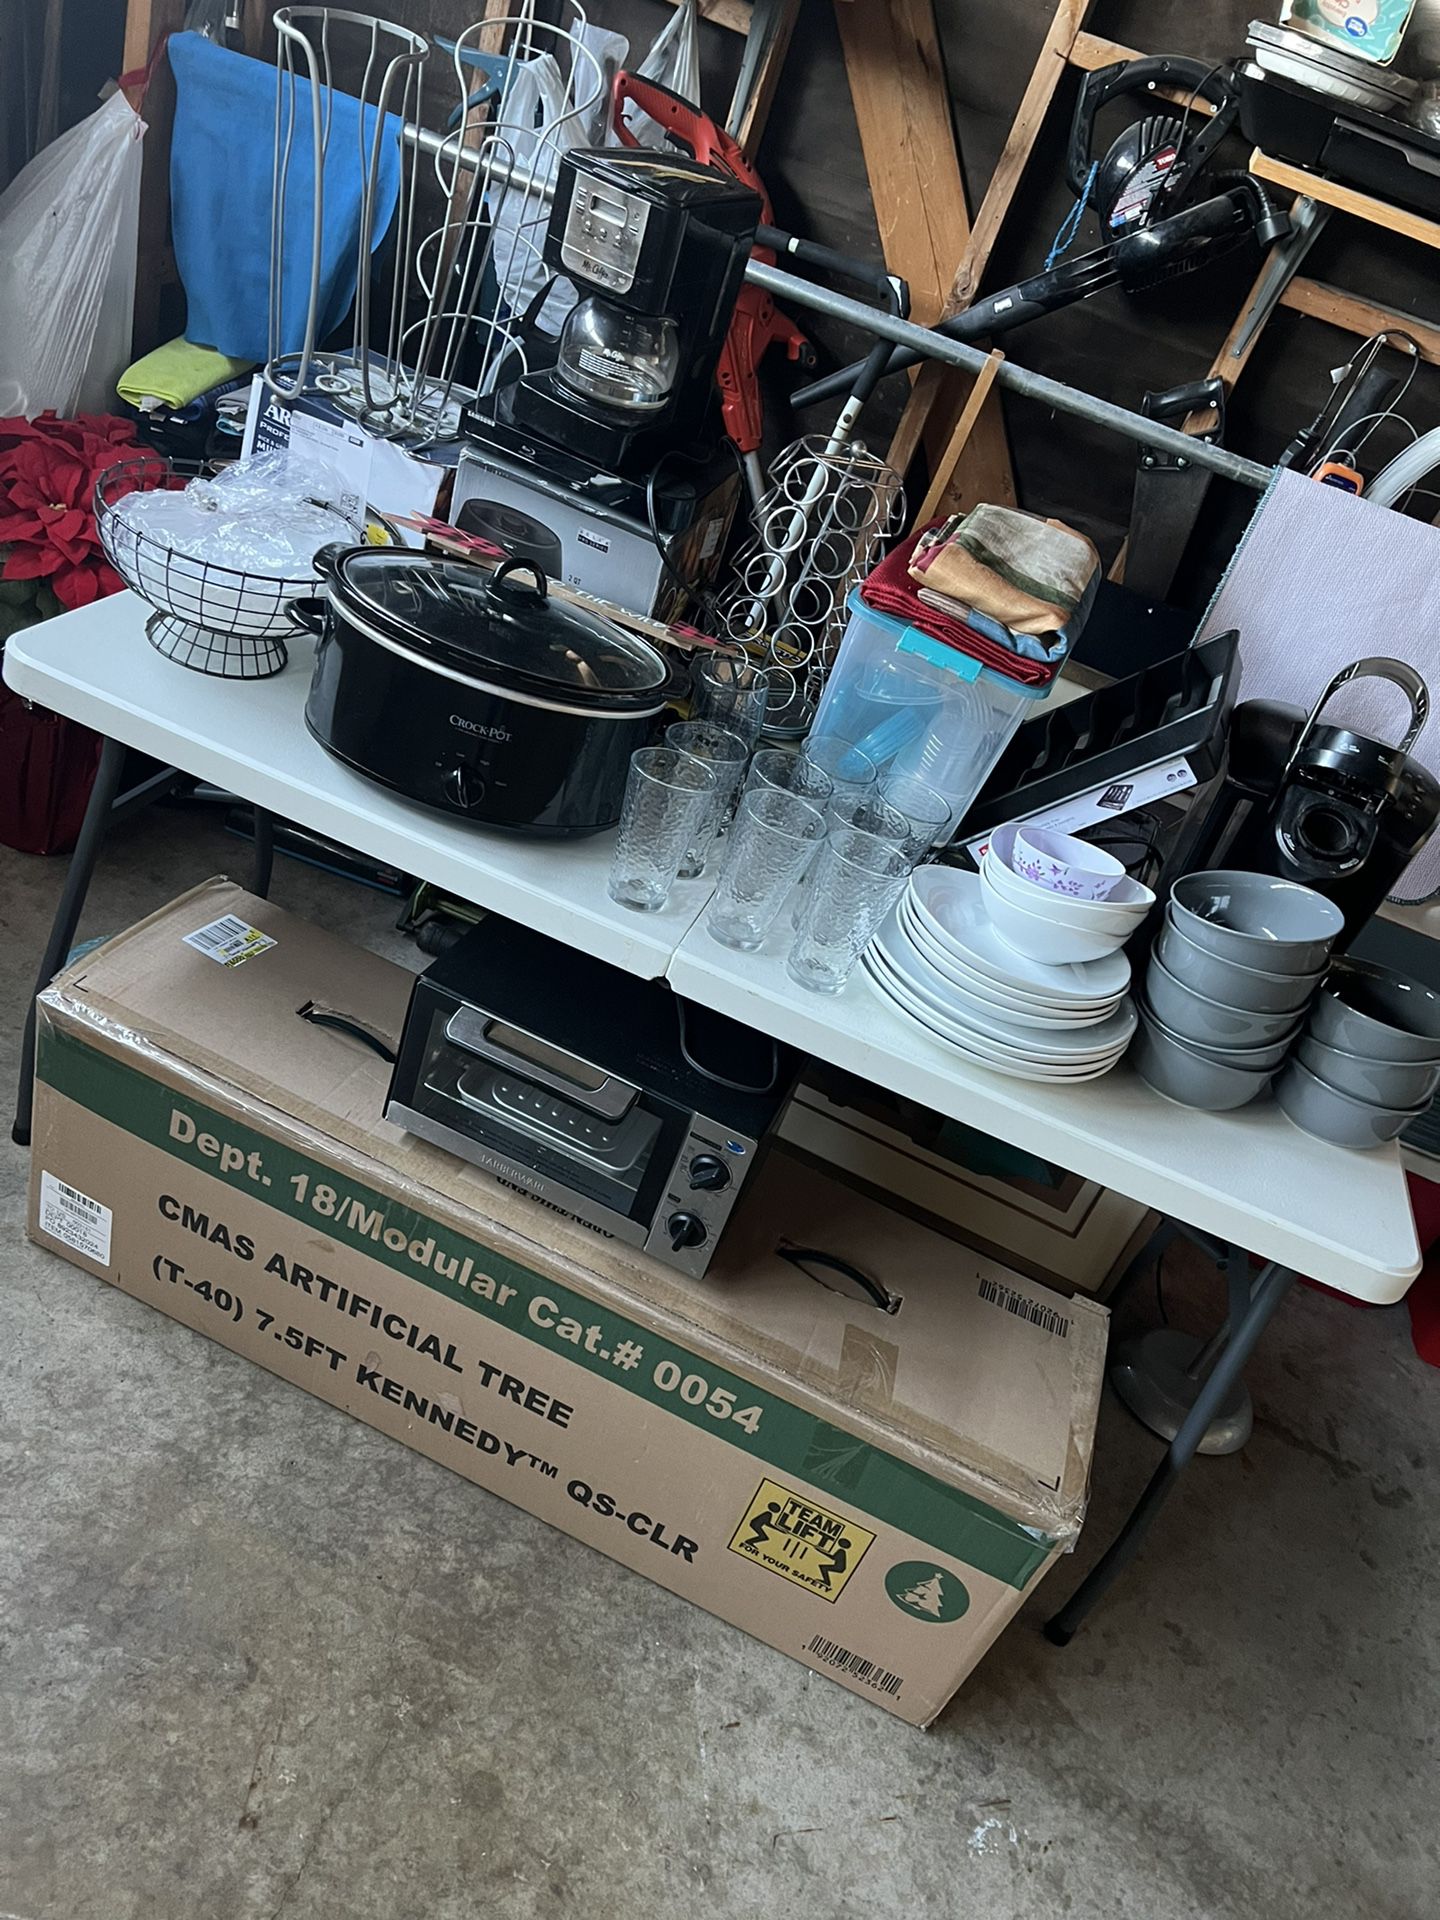 Coffee Maker, Crock Pot And Lot More!!! Sale!!!